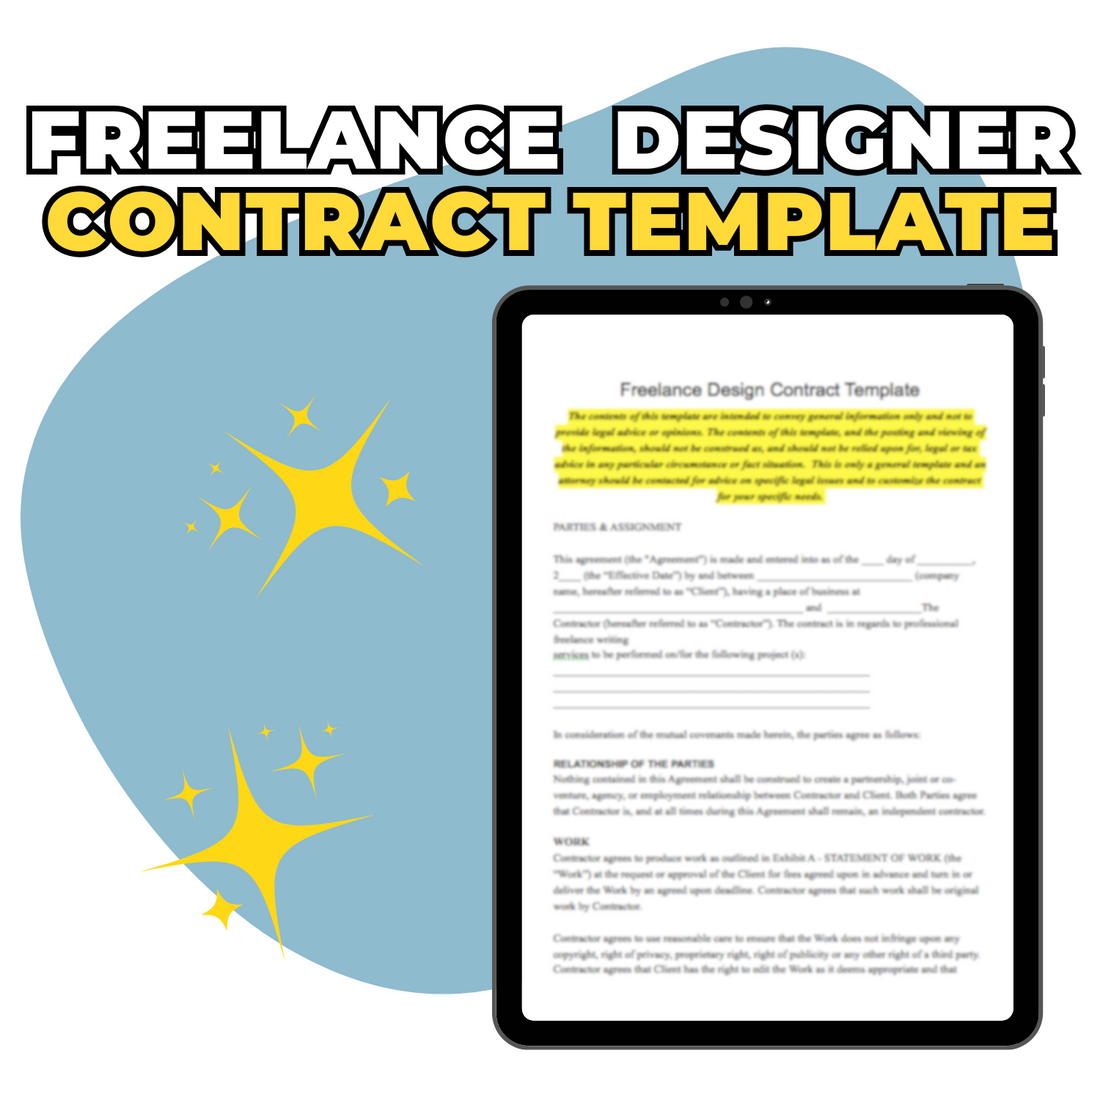 Graphic promoting an ElizabethStapleton.com Freelance Designer Contract Template, featuring an image of a digital tablet displaying the contract, adorned with star graphics on a blue background.